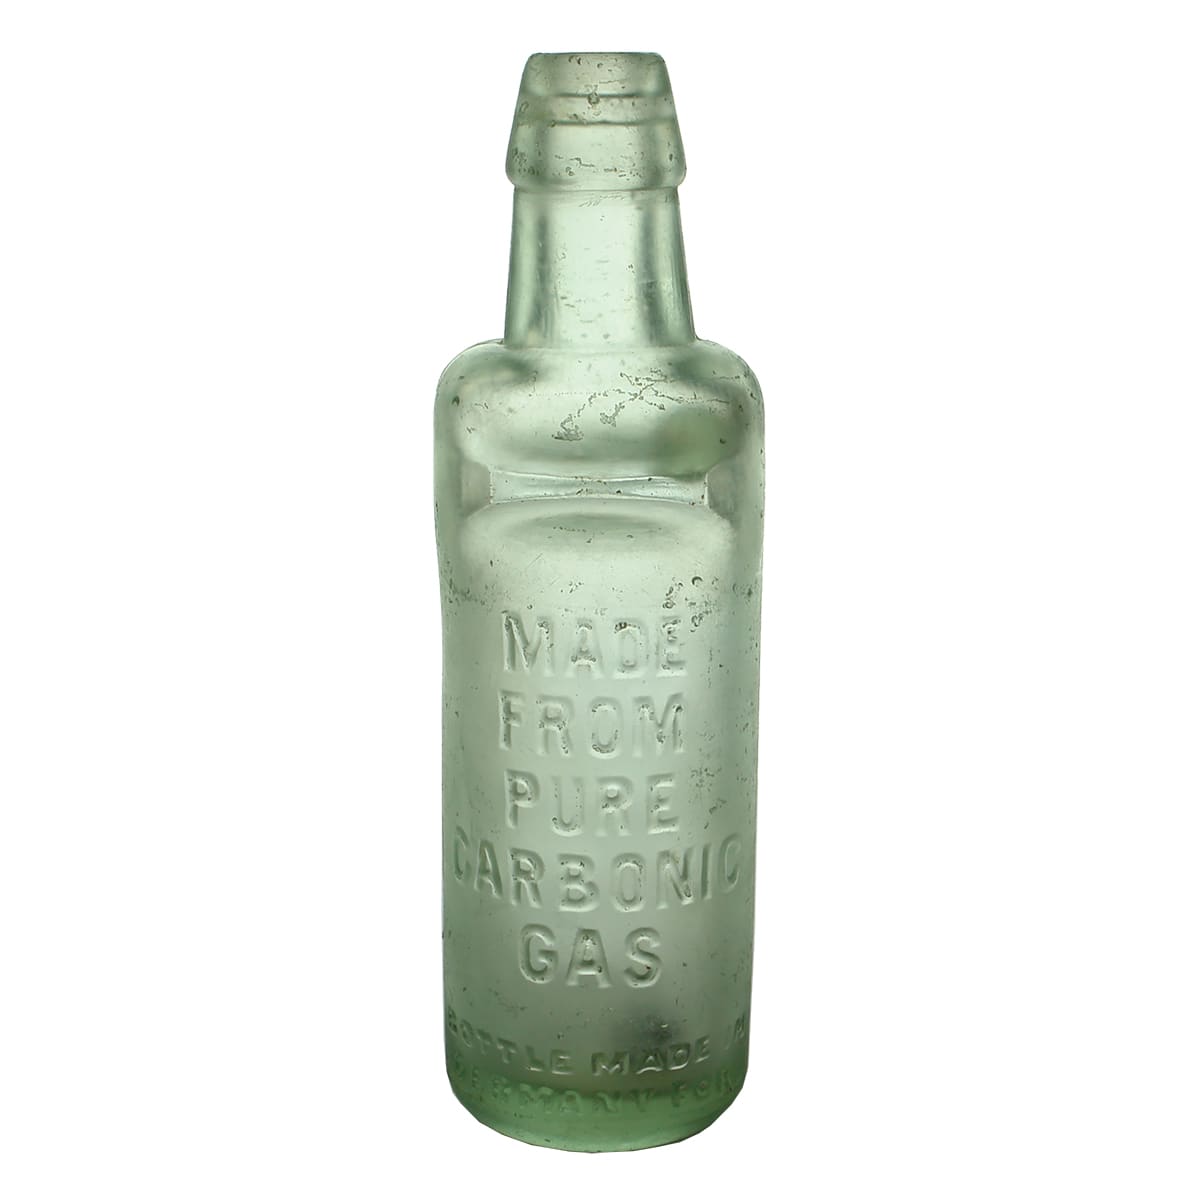 Codd. Made from Pure Carbonic Gas. Eckersley & Sons, Melbourne. All Way Pour. Aqua. 10 oz. (Victoria)